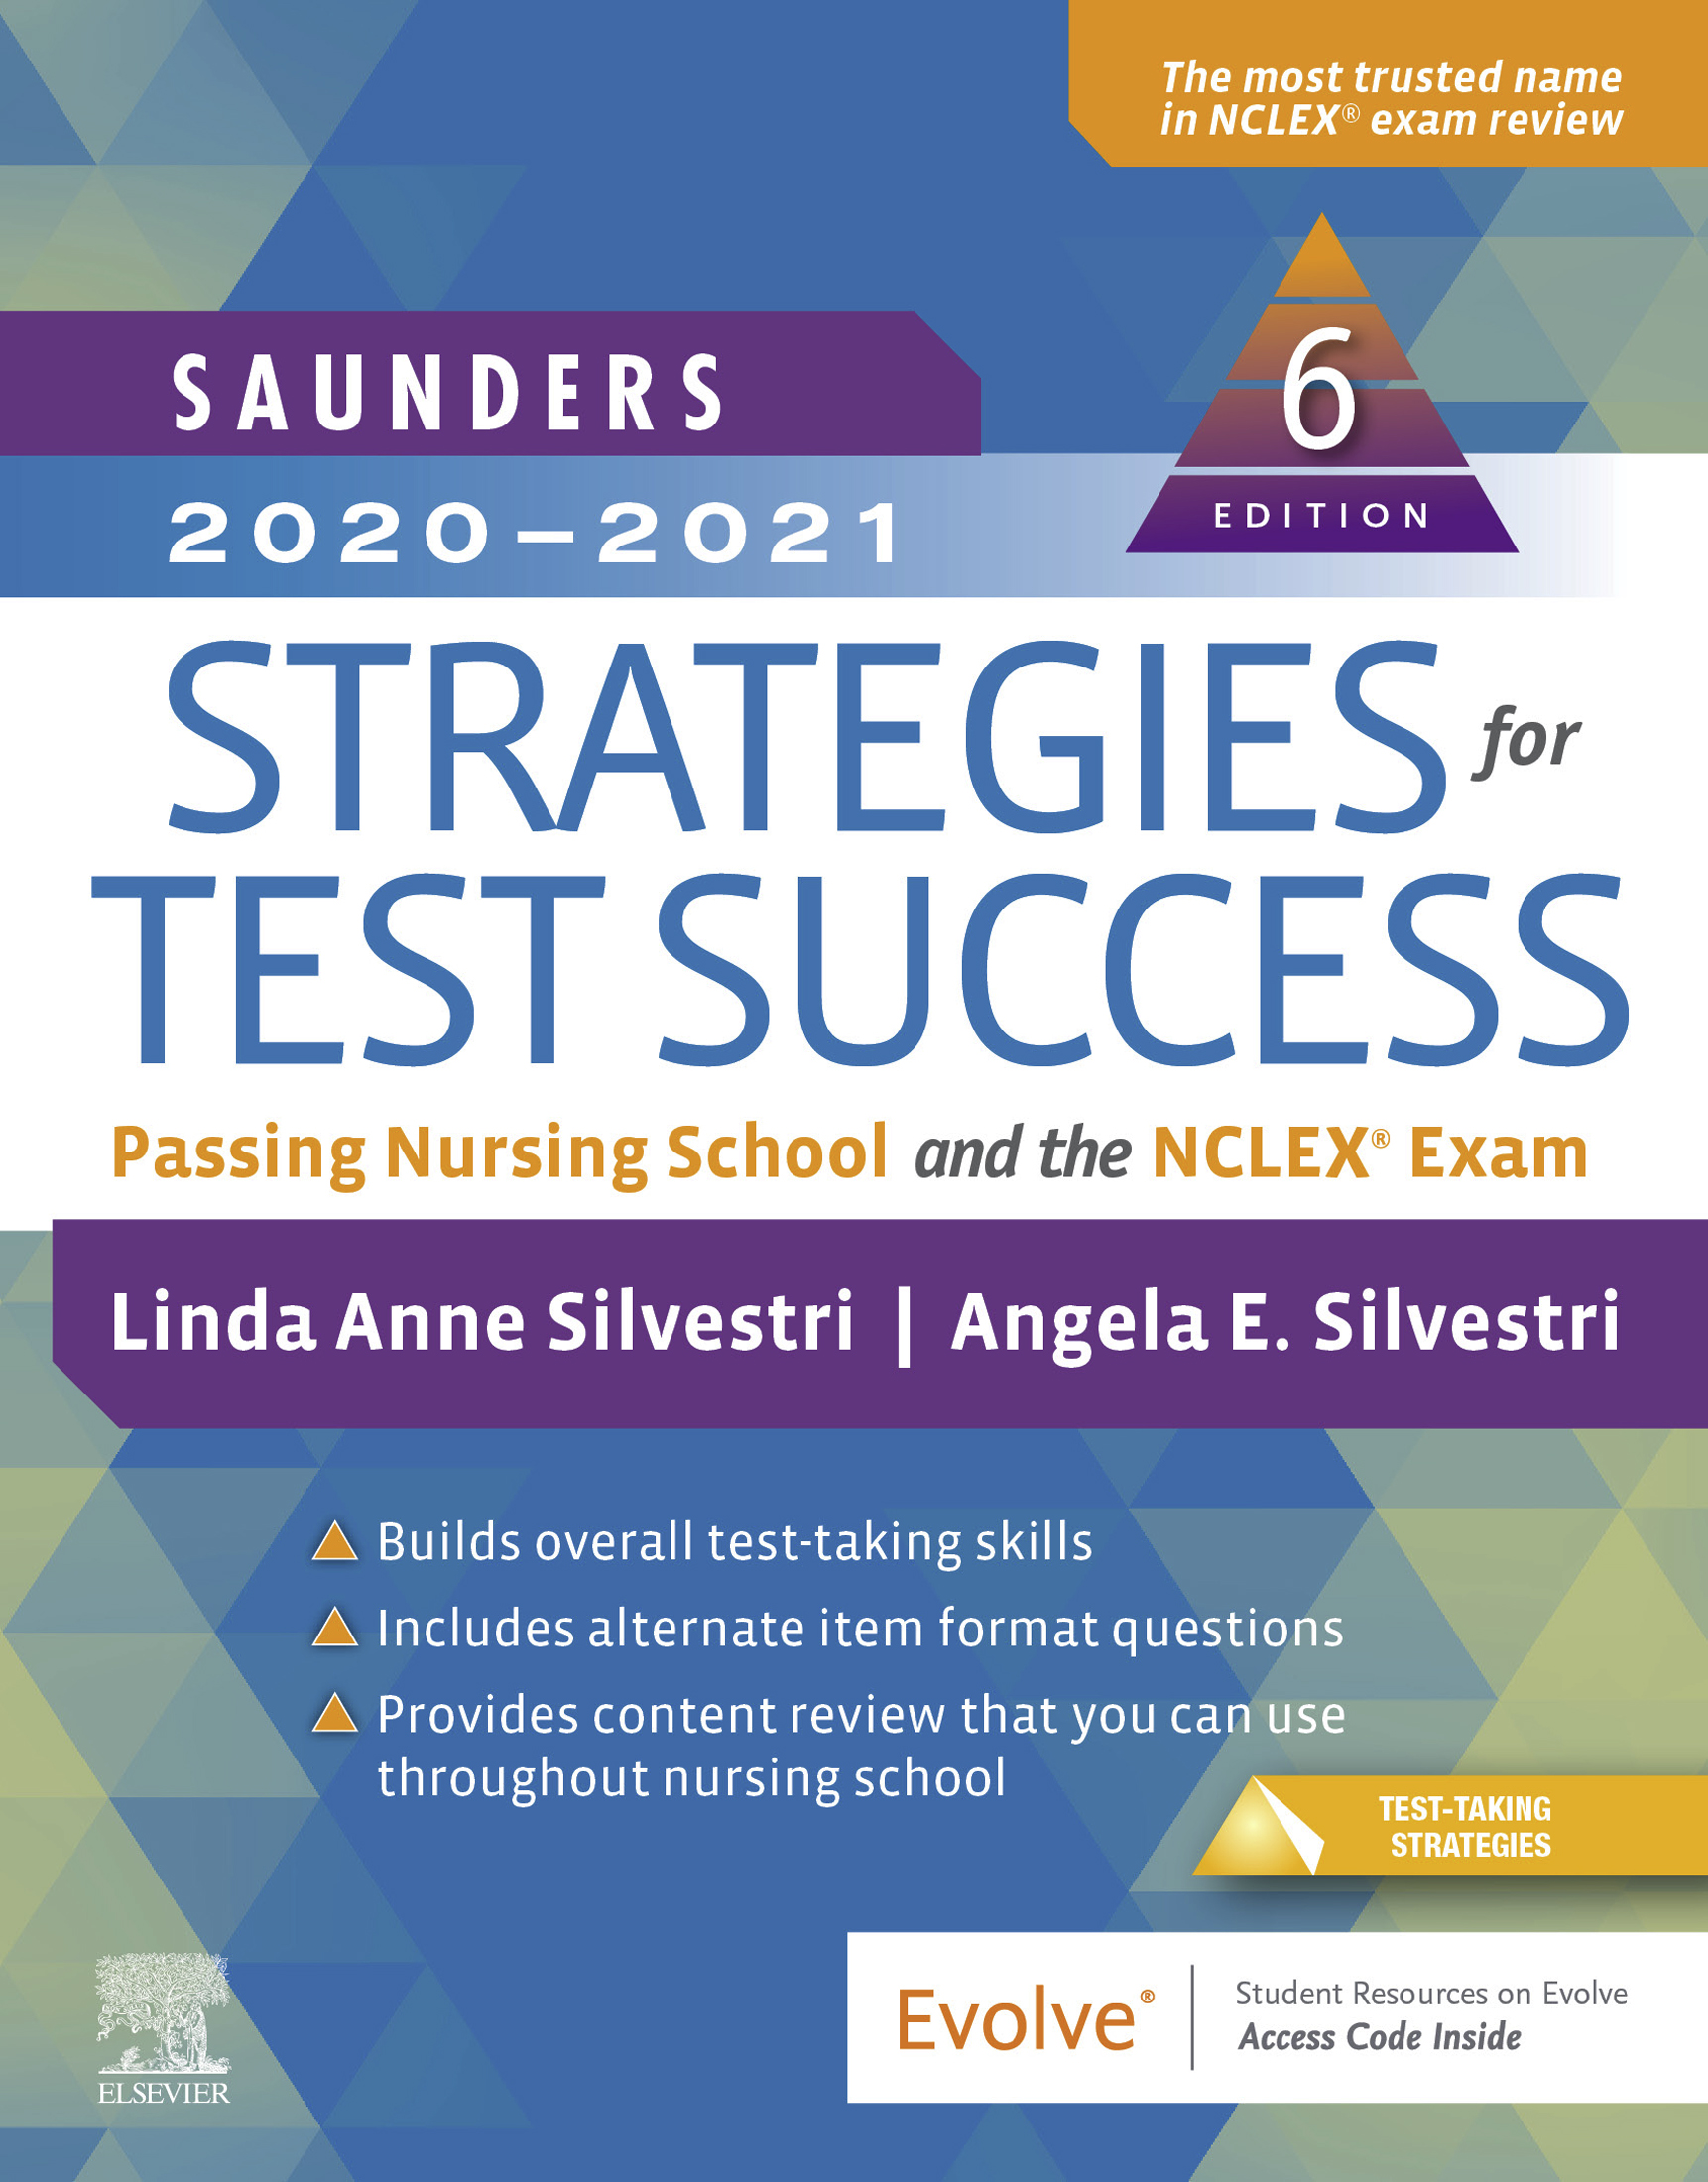 Saunders 2020-2021 Strategies for Test Success - E-Book